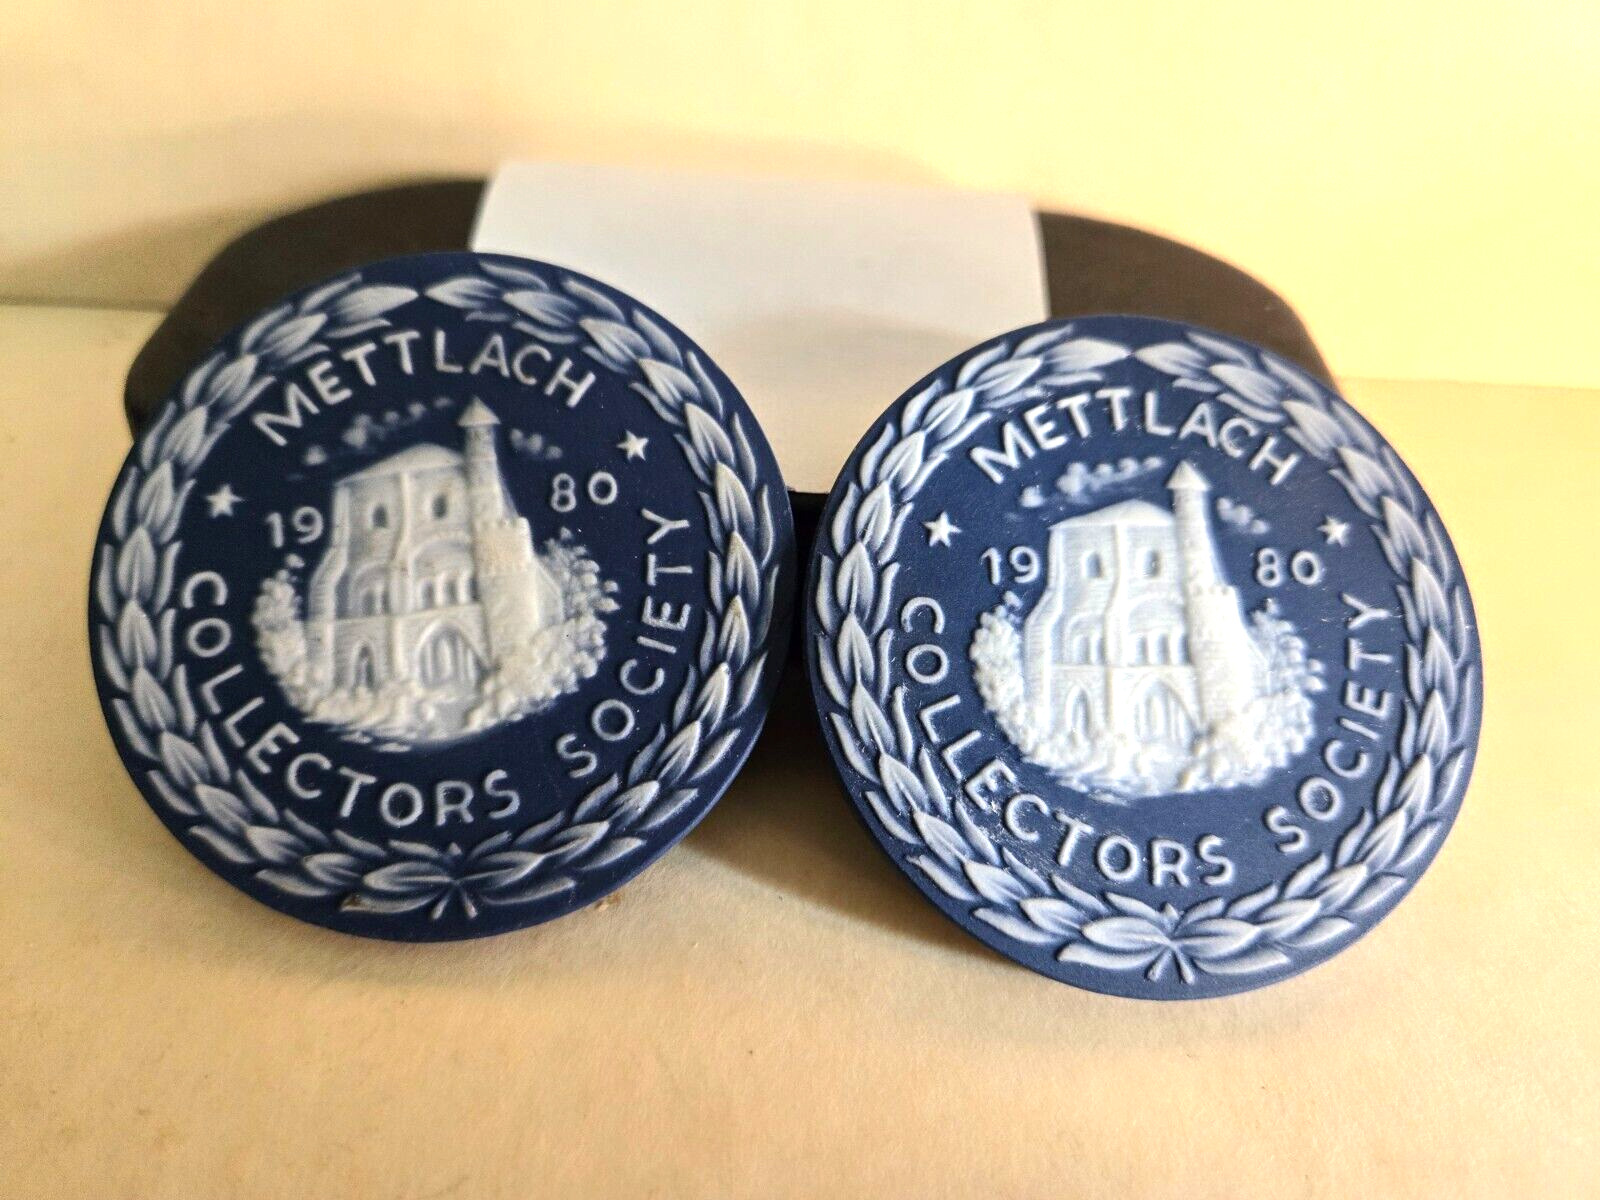 (2) Villeroy Boch Mettlach Collectors Society 1980 Medallion Coins  Germany